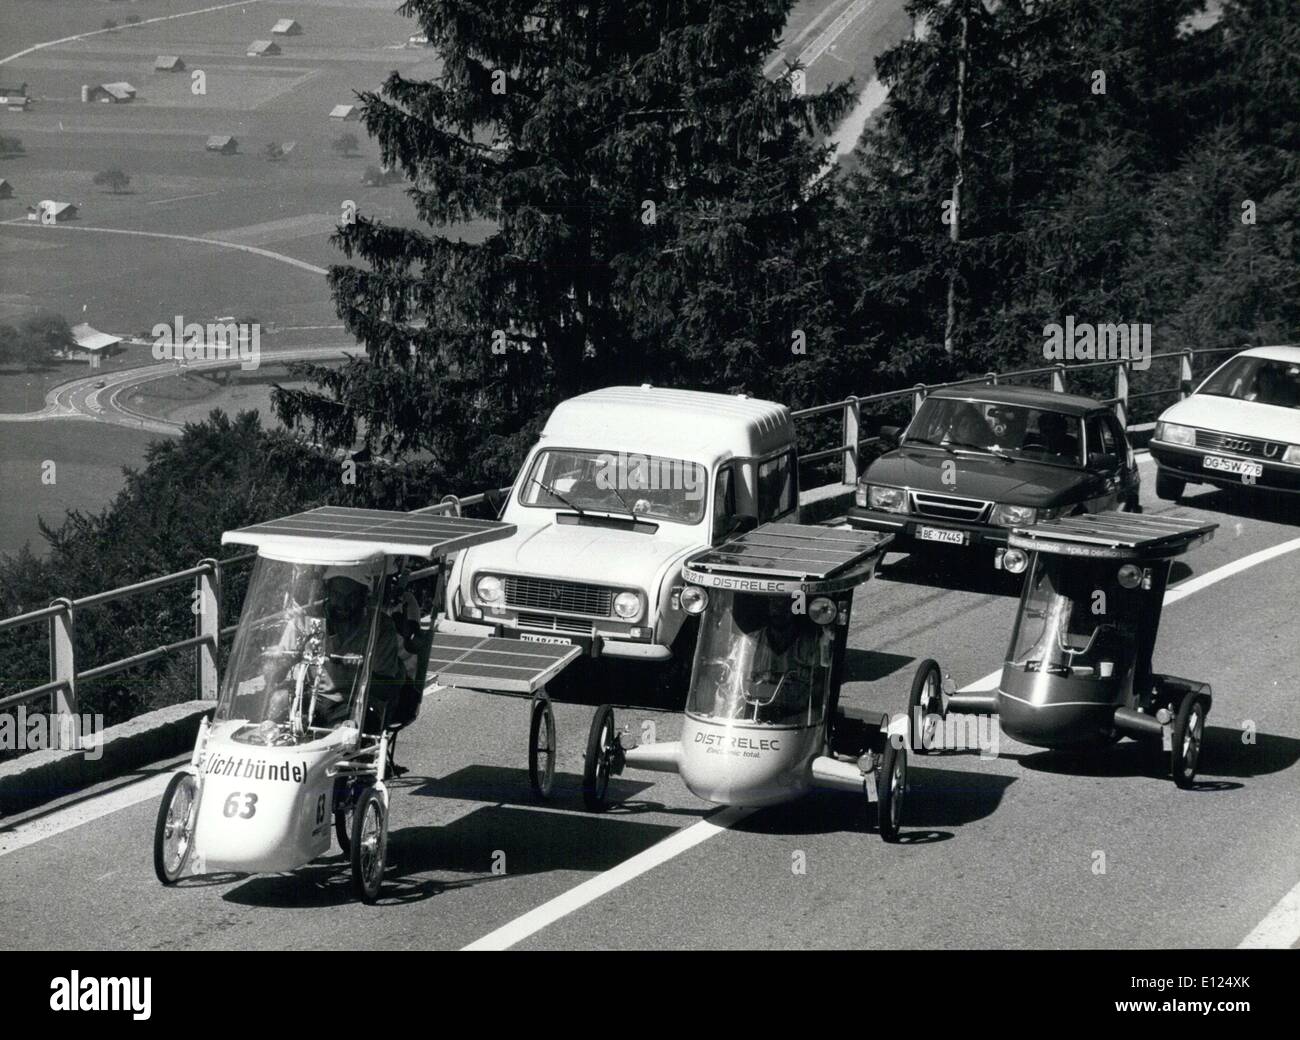 Jun. 30, 1986 - With solar energy in the Swiss mountains: Solar mobils take the upgrade together with ordinary cars on the Brunig-pass street that links famous holiday region of Brienz/Interlaken with Lucerne. Foto taken during the ''Tour de Sol'' solar mobil race through Switzerland last Friday 27th. the Tour ended in Suhr (Canton of Aargau) on Saturday. Stock Photo